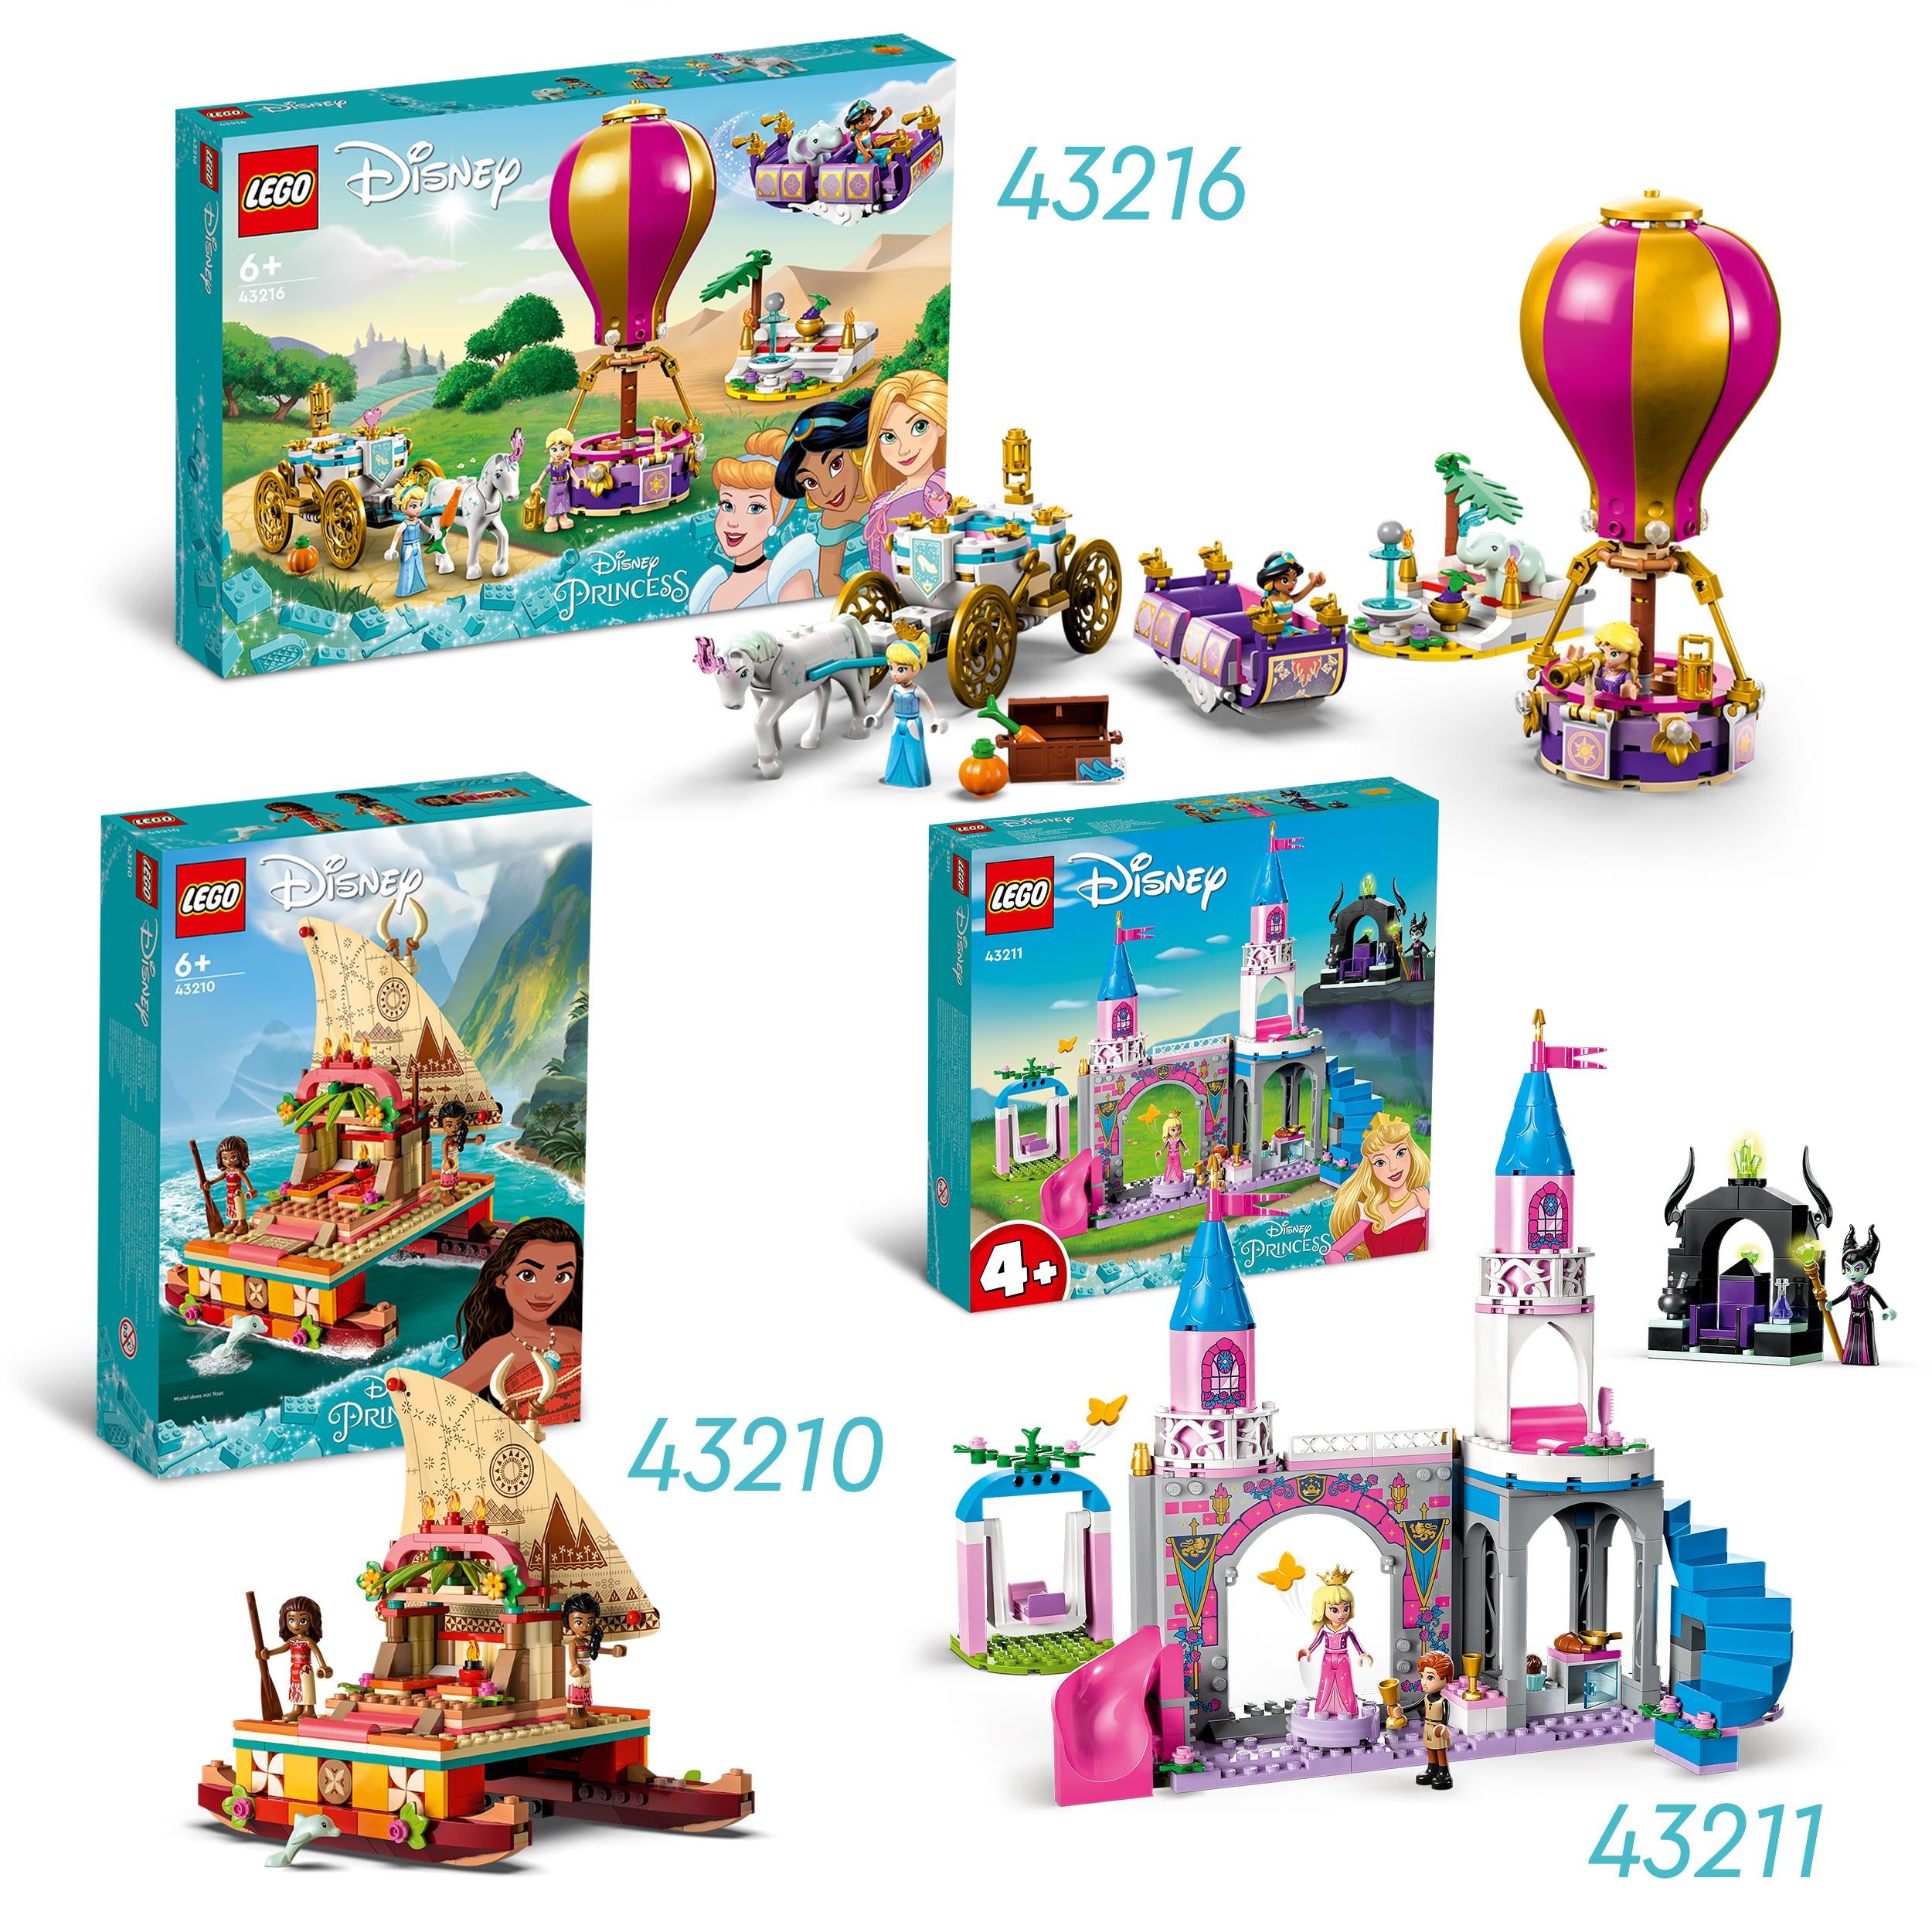 LEGO Disney Princess Enchanted Journey 43216 Building Set - 3in1 Playset  with Cinderella, Jasmine, Rapunzel Mini Dolls, Toy Horse & Carriage, Hot  Air Balloon, Gift for Girls, Boys, and Kids Ages 6+ 